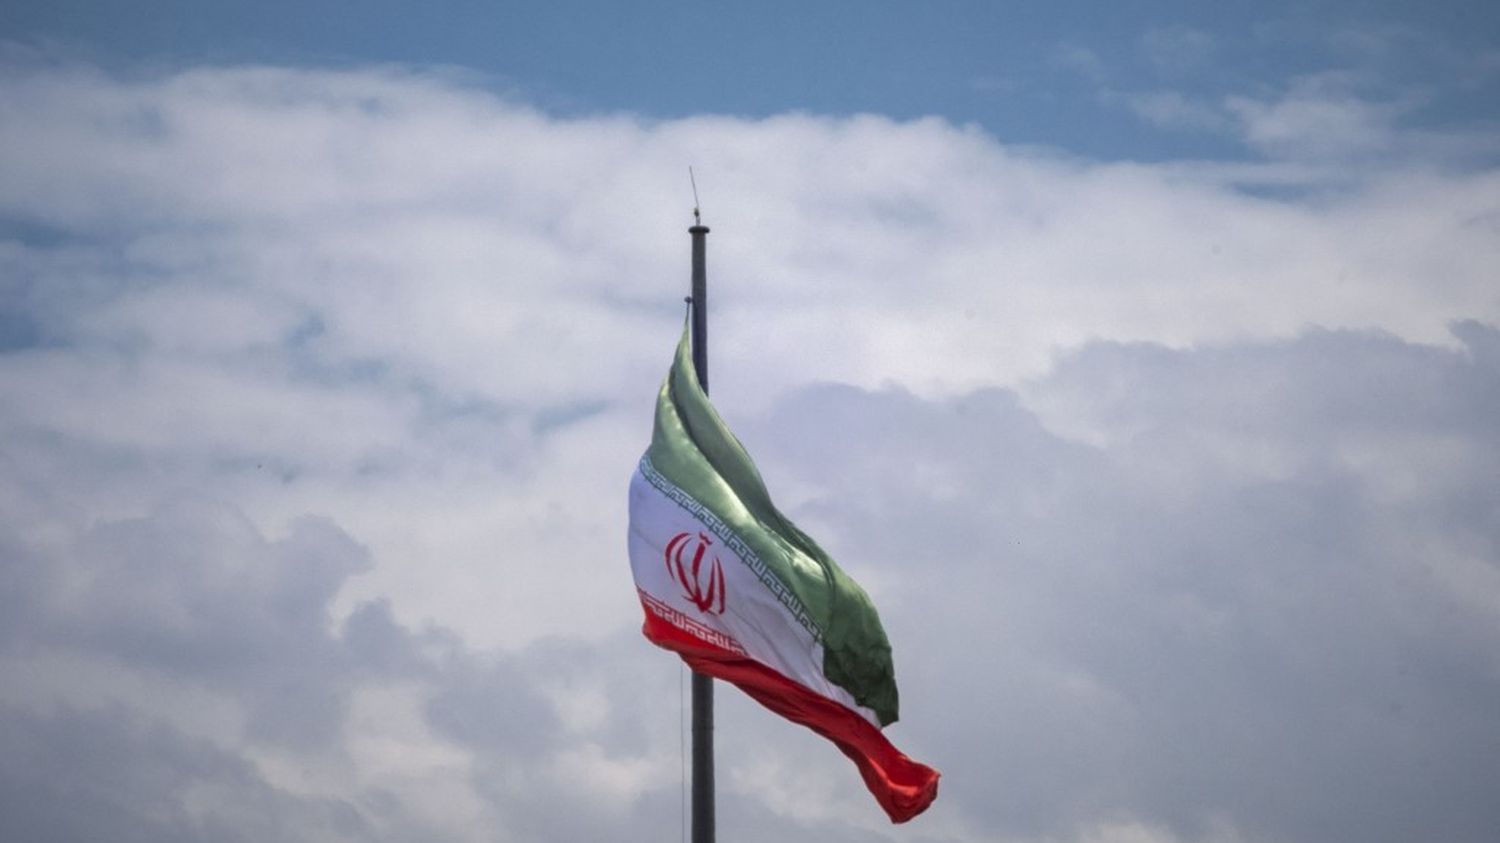 Two French people were arrested in Iran, the Quai d'Orsay calls for their 